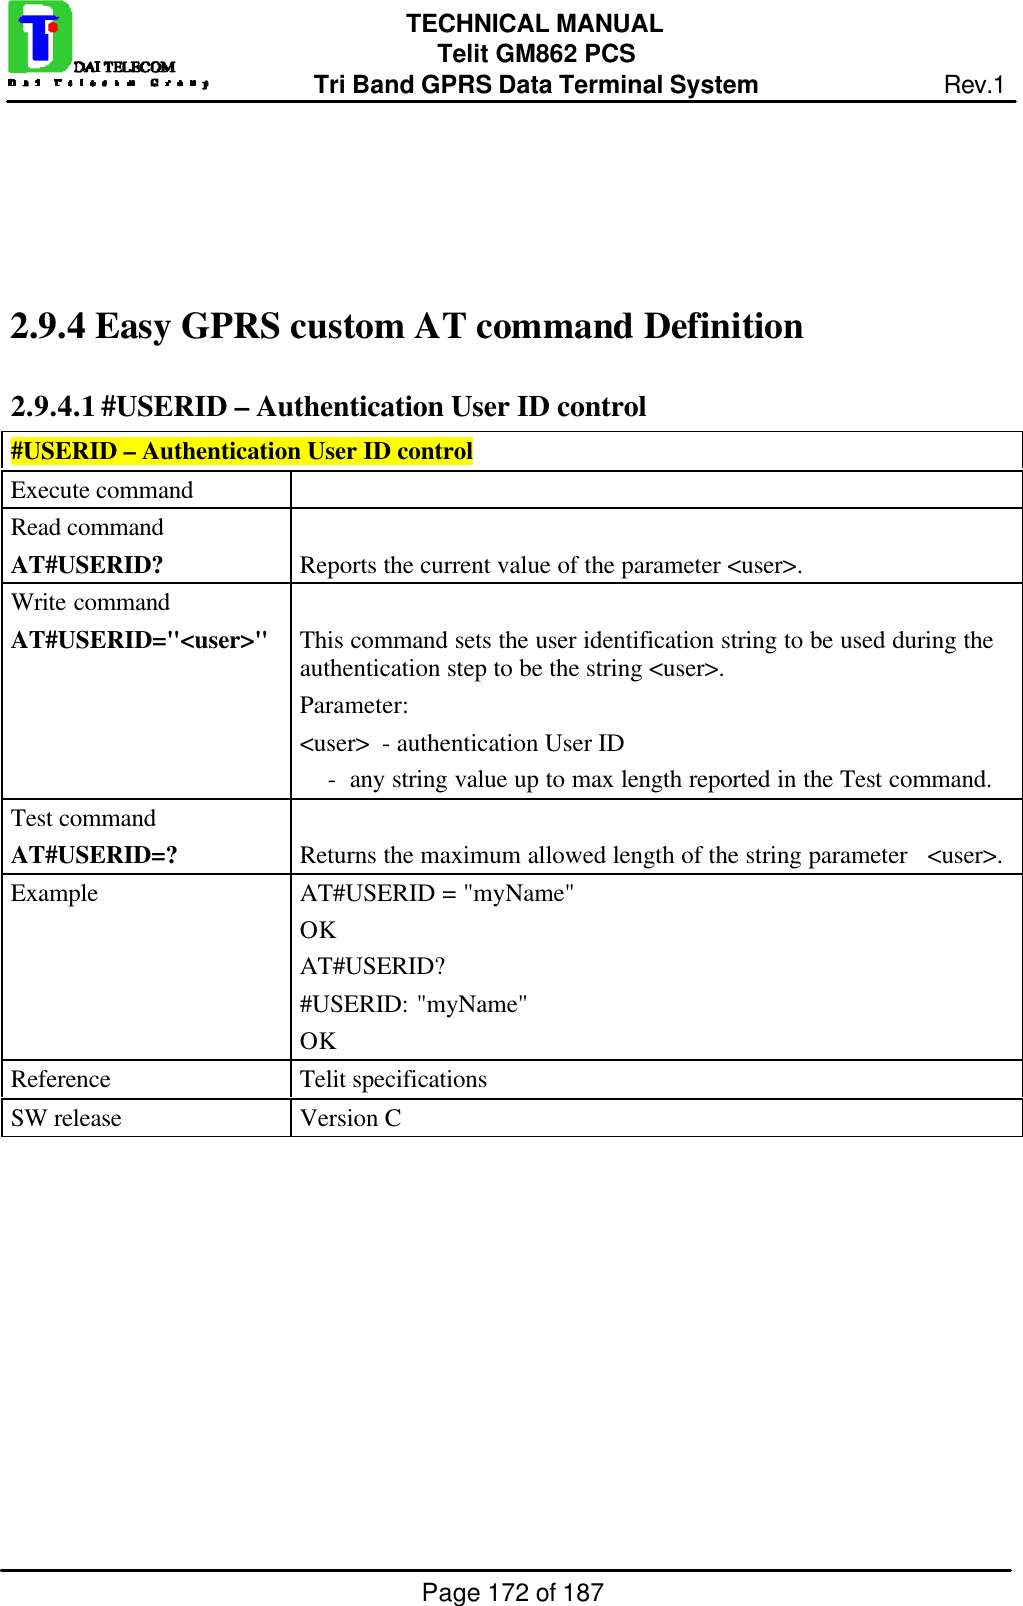 Page 172 of 187TECHNICAL MANUALTelit GM862 PCSTri Band GPRS Data Terminal System Rev.12.9.4  Easy GPRS custom AT command Definition2.9.4.1 #USERID – Authentication User ID control#USERID – Authentication User ID controlExecute commandRead commandAT#USERID? Reports the current value of the parameter &lt;user&gt;.Write commandAT#USERID=&quot;&lt;user&gt;&quot; This command sets the user identification string to be used during theauthentication step to be the string &lt;user&gt;.Parameter:&lt;user&gt;  - authentication User ID    -  any string value up to max length reported in the Test command.Test commandAT#USERID=? Returns the maximum allowed length of the string parameter   &lt;user&gt;.Example AT#USERID = &quot;myName&quot;OKAT#USERID?#USERID: &quot;myName&quot;OKReference Telit specificationsSW release Version C